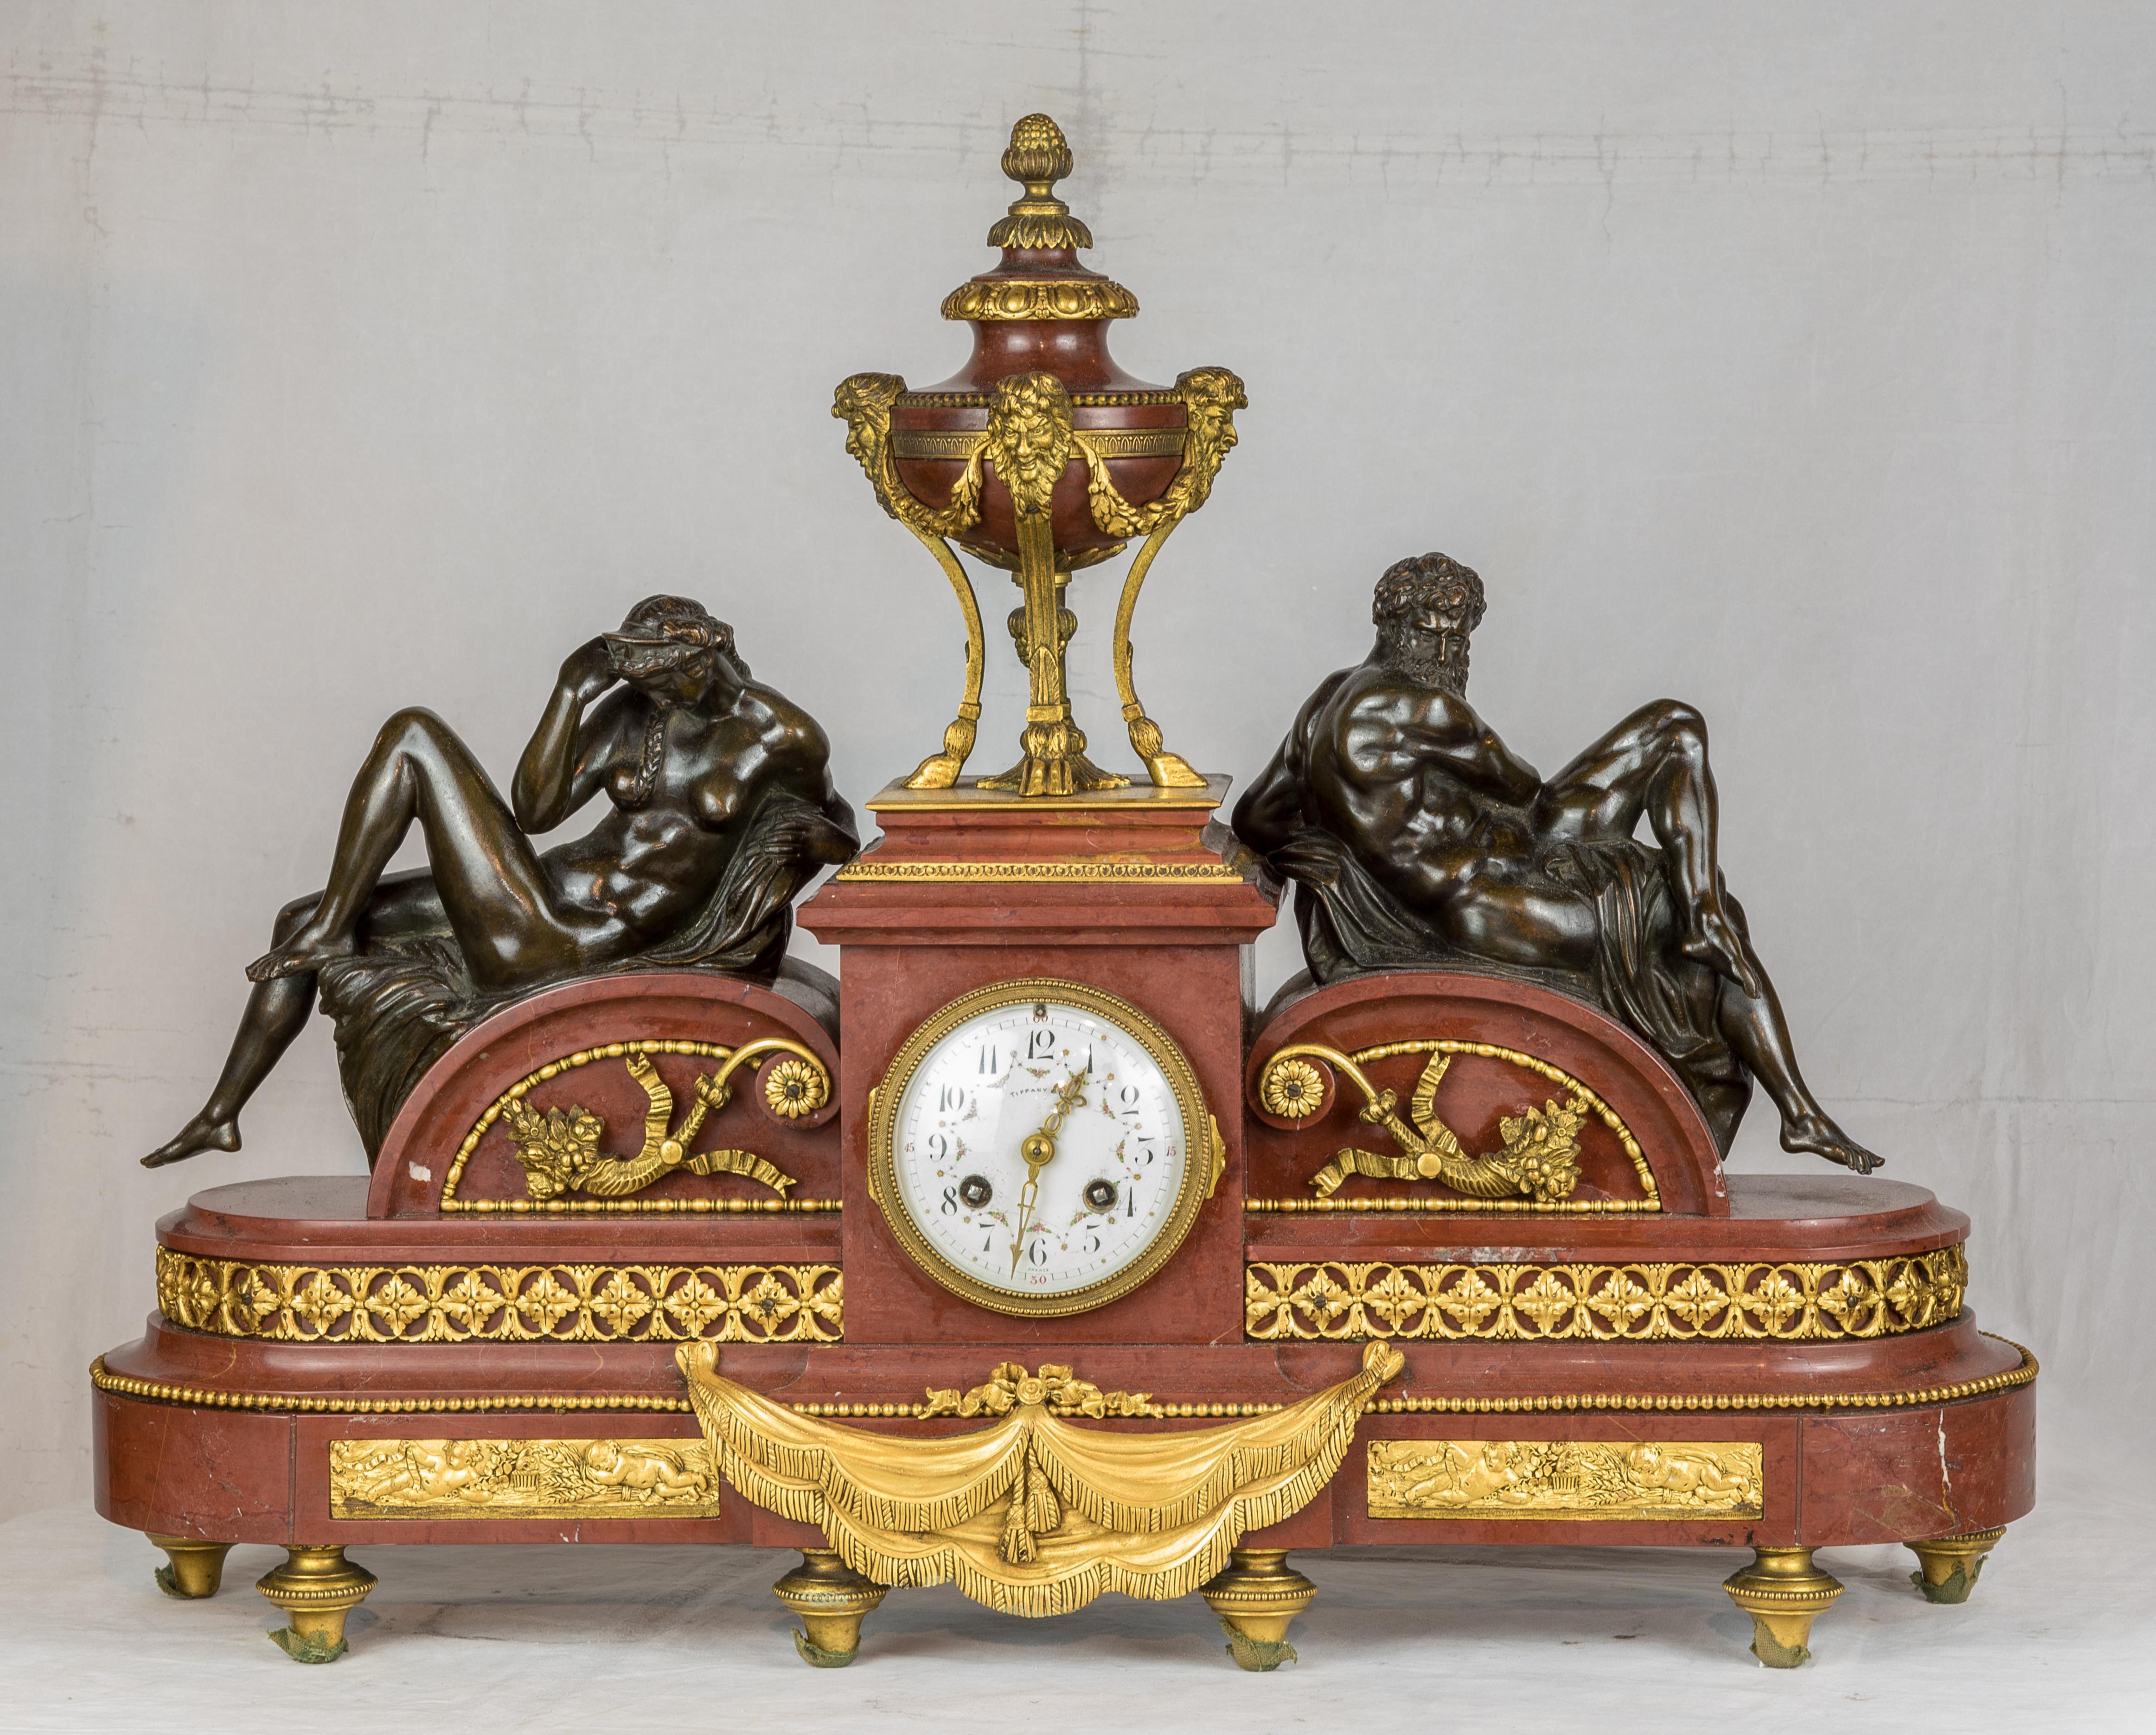 A Tiffany & Co. gilt bronze and rouge marble mantel clock with figures of night and day

Maker: Tiffany & Co. (American, 1837-)
Date: Circa 1890
Dimension: 18 in. x 24 in.